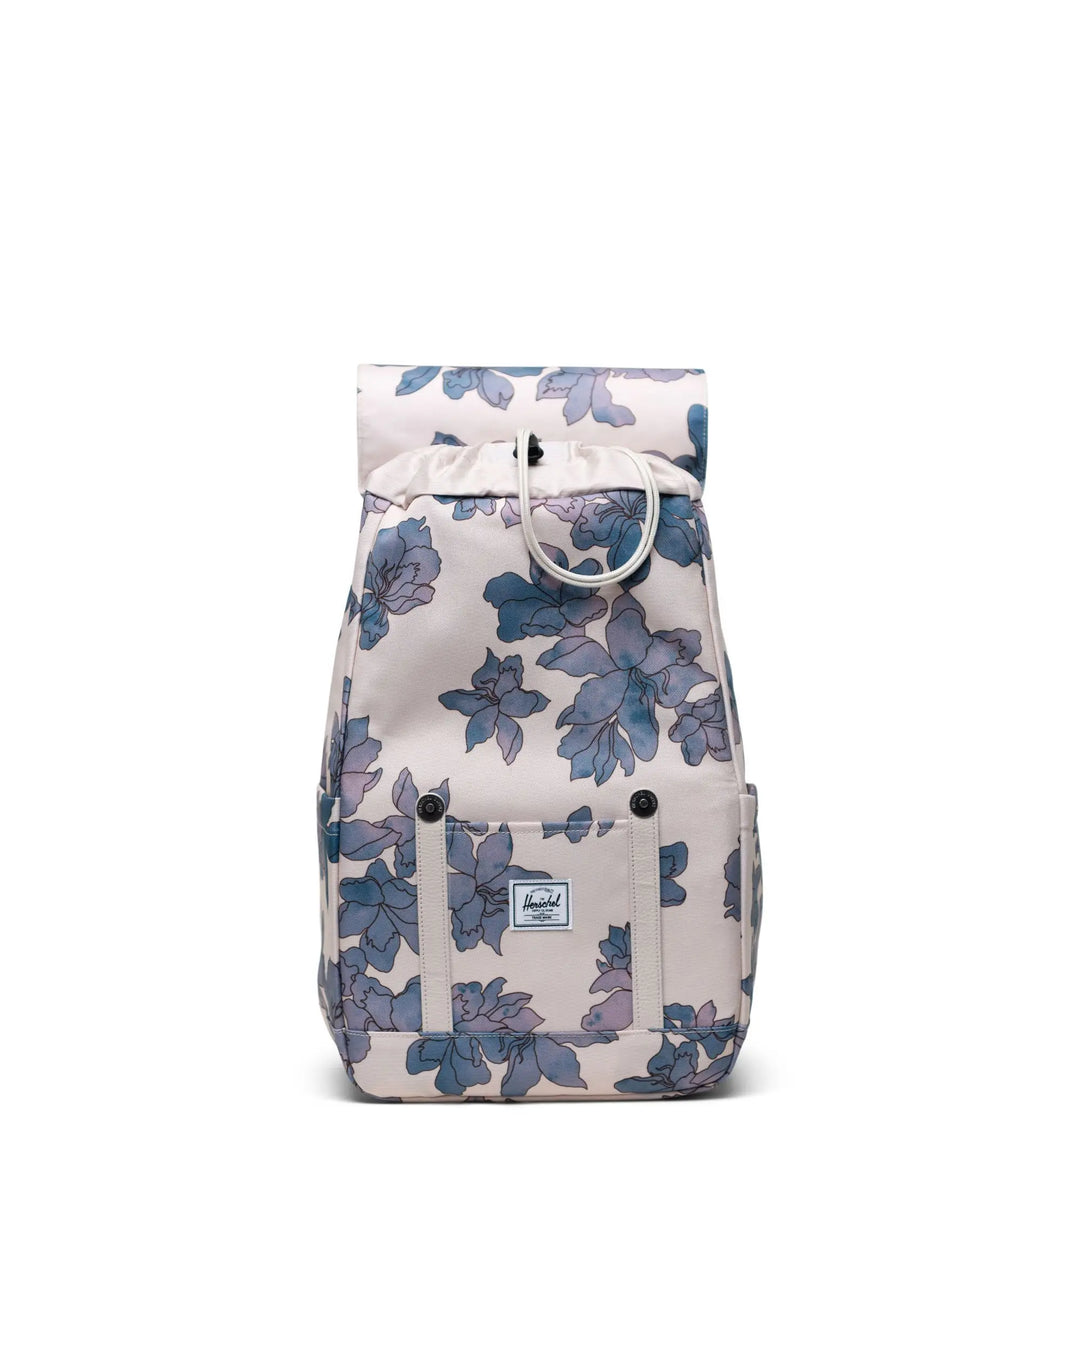 Herschel Supply Co. Retreat Backpack Small - 17L - Moonbeam Floral Waves - Sun Diego Boardshop